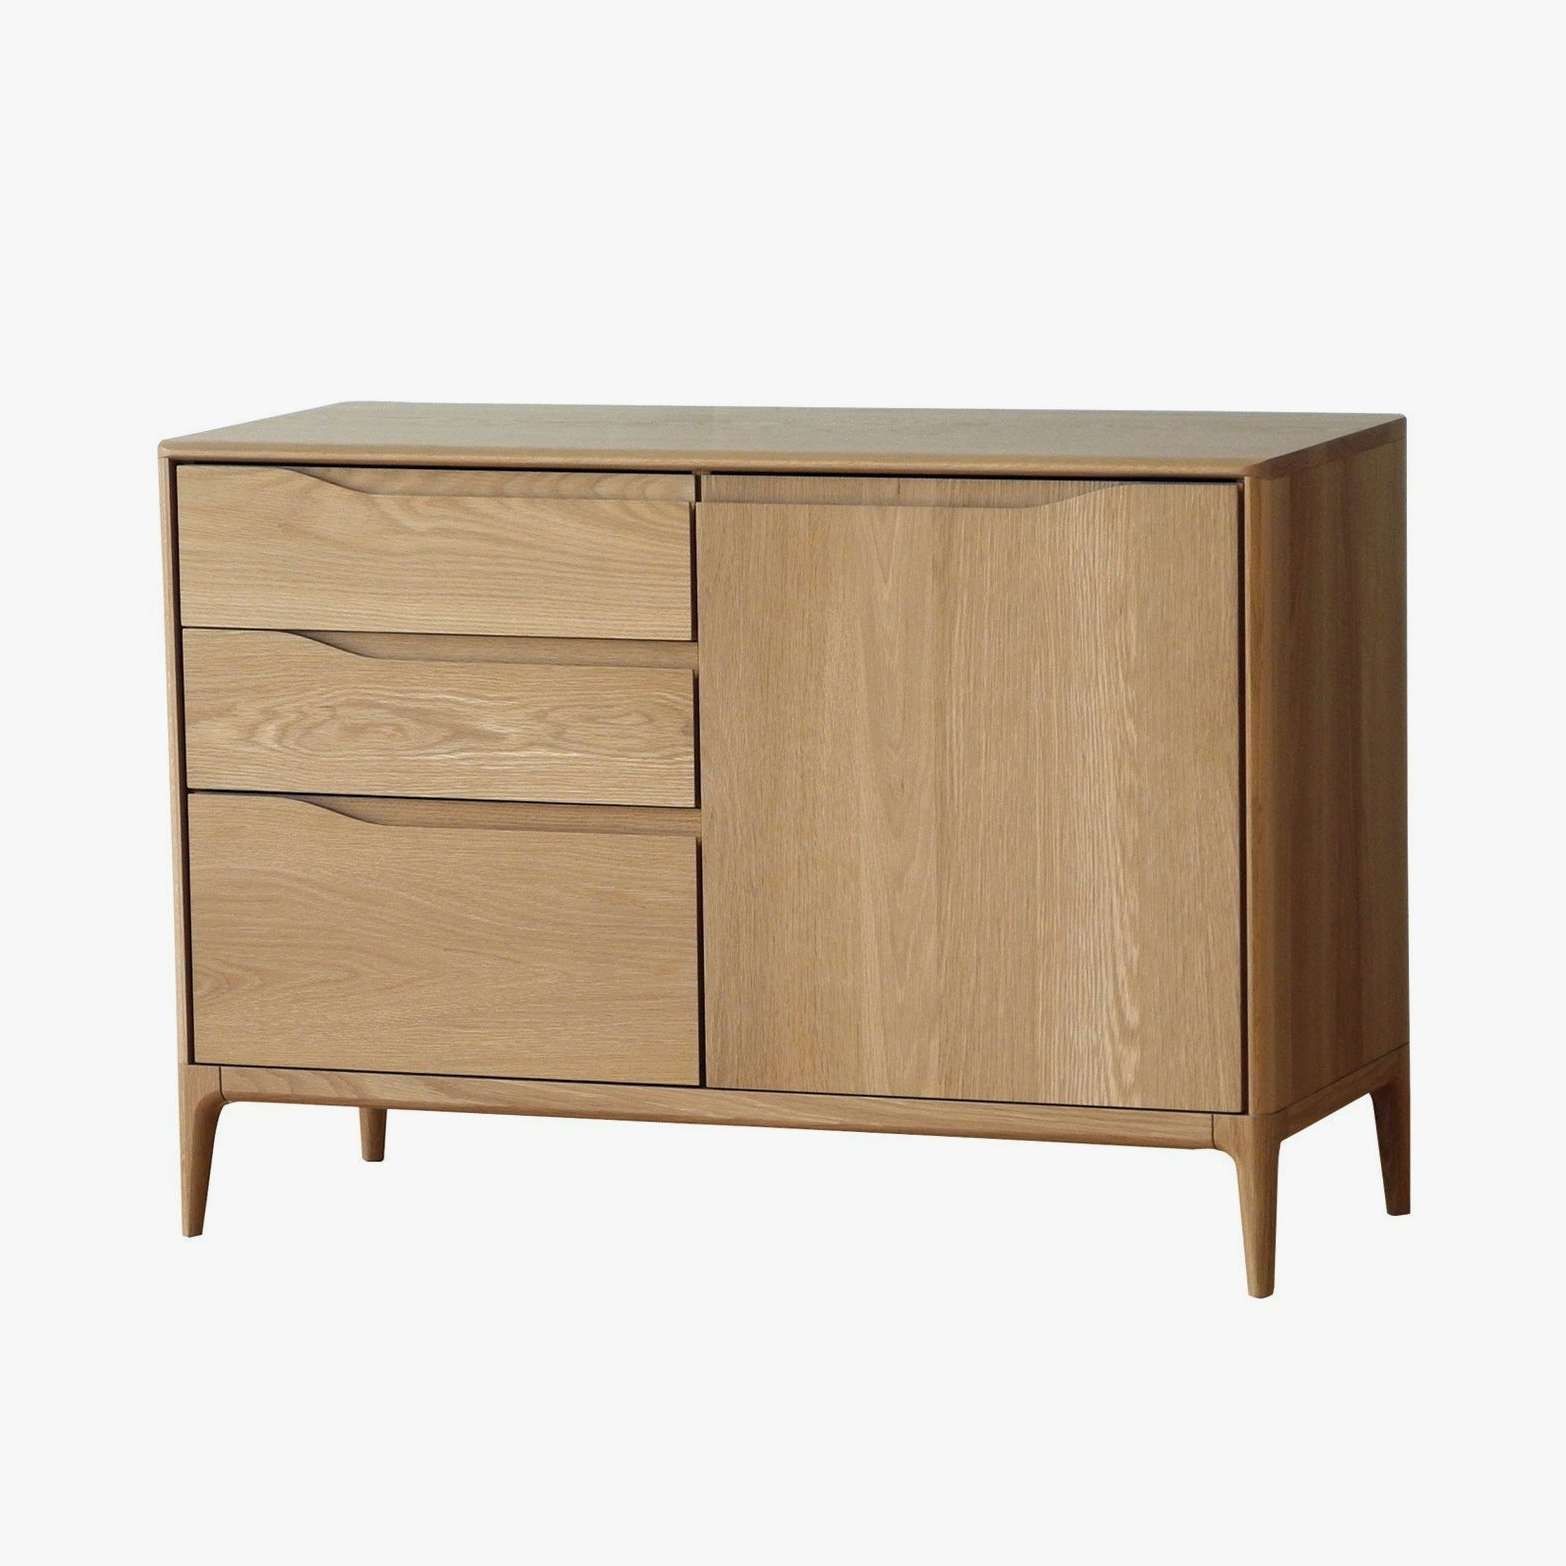 Romana Small Sideboardercol | Up Interiors Intended For Small Sideboards (View 16 of 20)